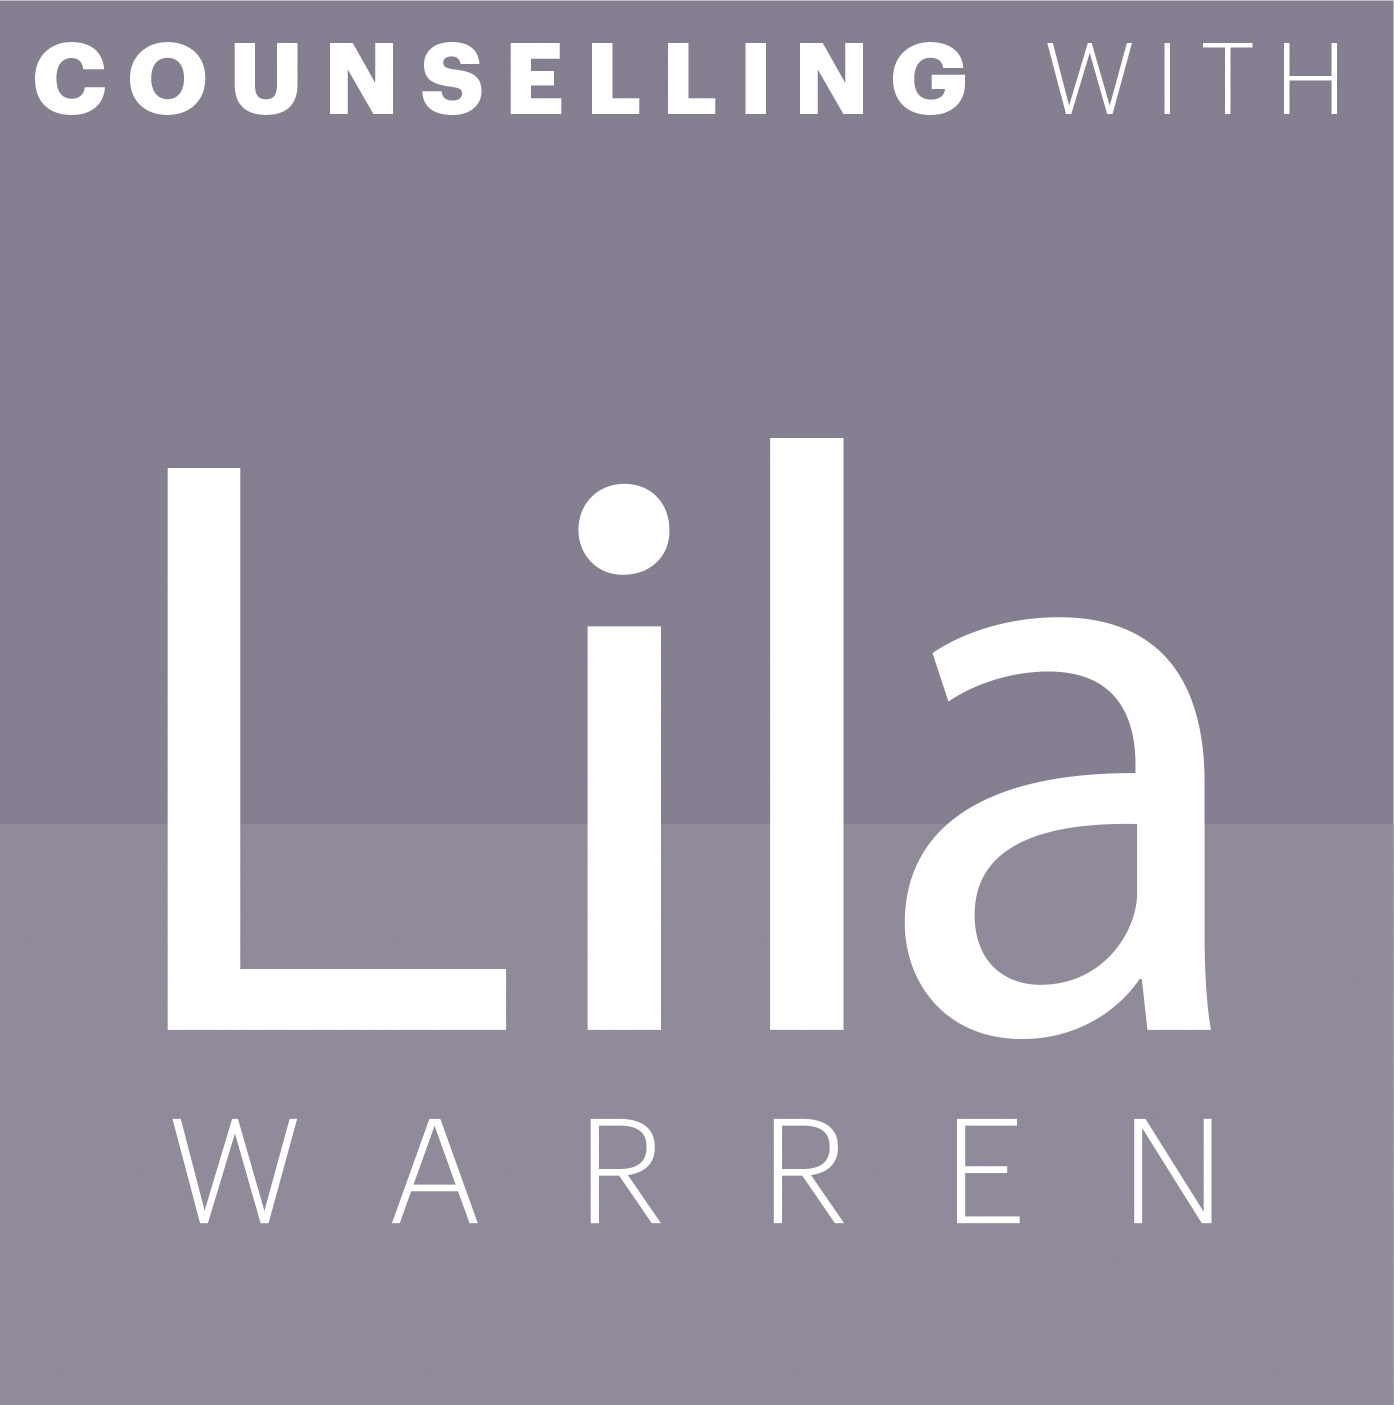 Counselling with Lila Warren